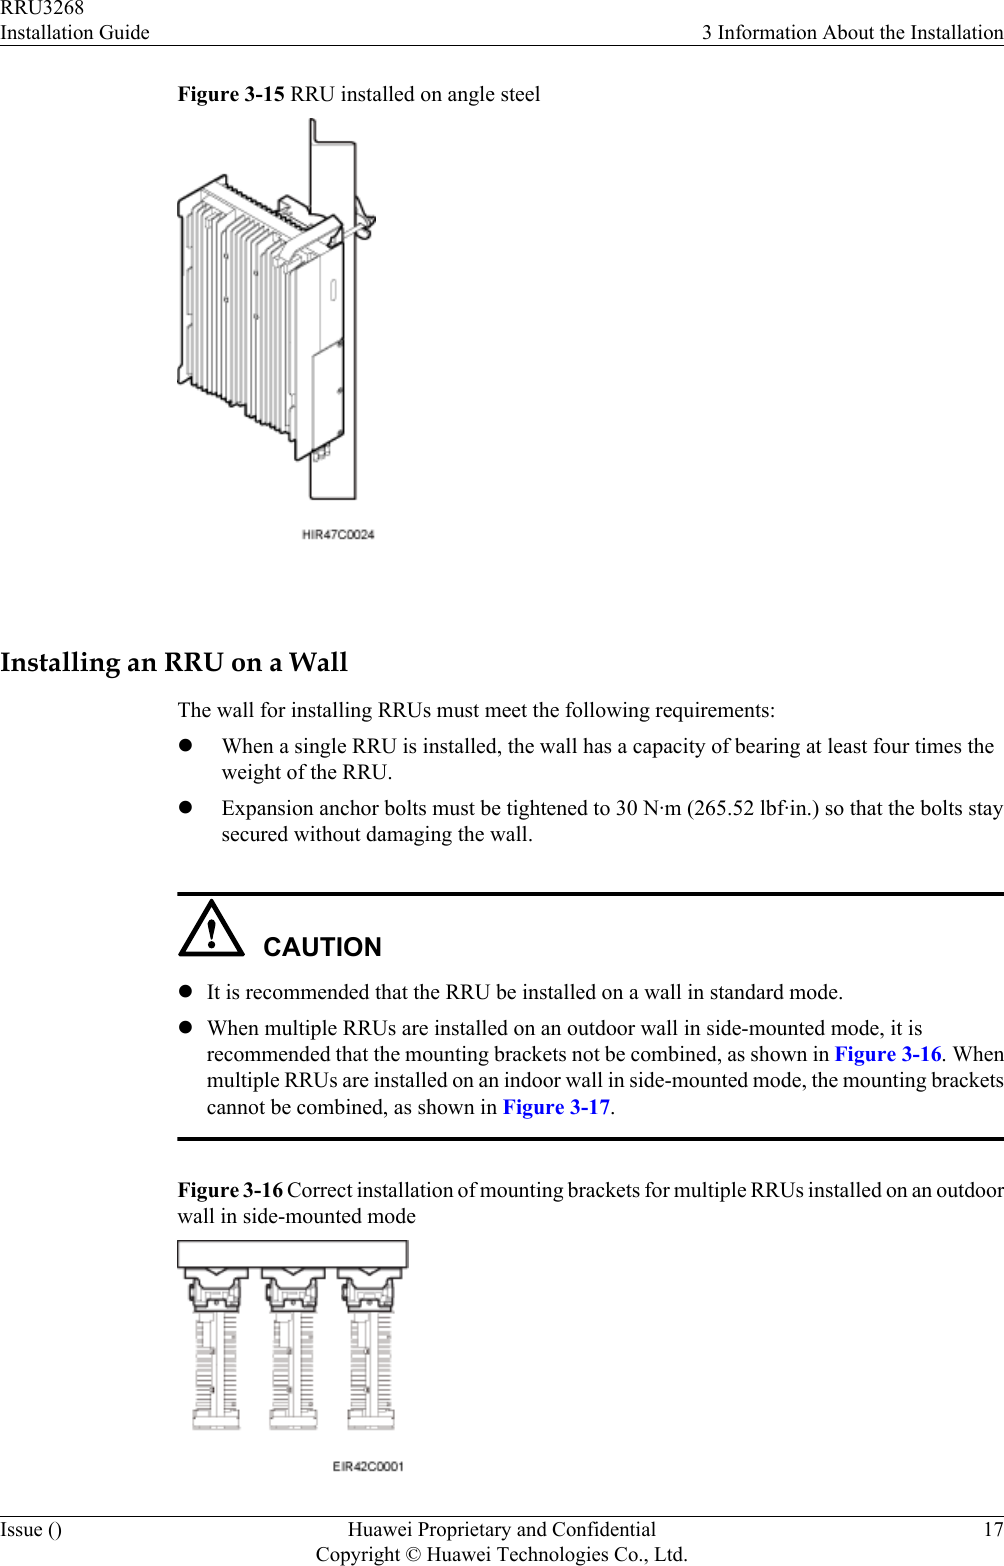 Figure 3-15 RRU installed on angle steel Installing an RRU on a WallThe wall for installing RRUs must meet the following requirements:lWhen a single RRU is installed, the wall has a capacity of bearing at least four times theweight of the RRU.lExpansion anchor bolts must be tightened to 30 N·m (265.52 lbf·in.) so that the bolts staysecured without damaging the wall.CAUTIONlIt is recommended that the RRU be installed on a wall in standard mode.lWhen multiple RRUs are installed on an outdoor wall in side-mounted mode, it isrecommended that the mounting brackets not be combined, as shown in Figure 3-16. Whenmultiple RRUs are installed on an indoor wall in side-mounted mode, the mounting bracketscannot be combined, as shown in Figure 3-17.Figure 3-16 Correct installation of mounting brackets for multiple RRUs installed on an outdoorwall in side-mounted modeRRU3268Installation Guide 3 Information About the InstallationIssue () Huawei Proprietary and ConfidentialCopyright © Huawei Technologies Co., Ltd.17